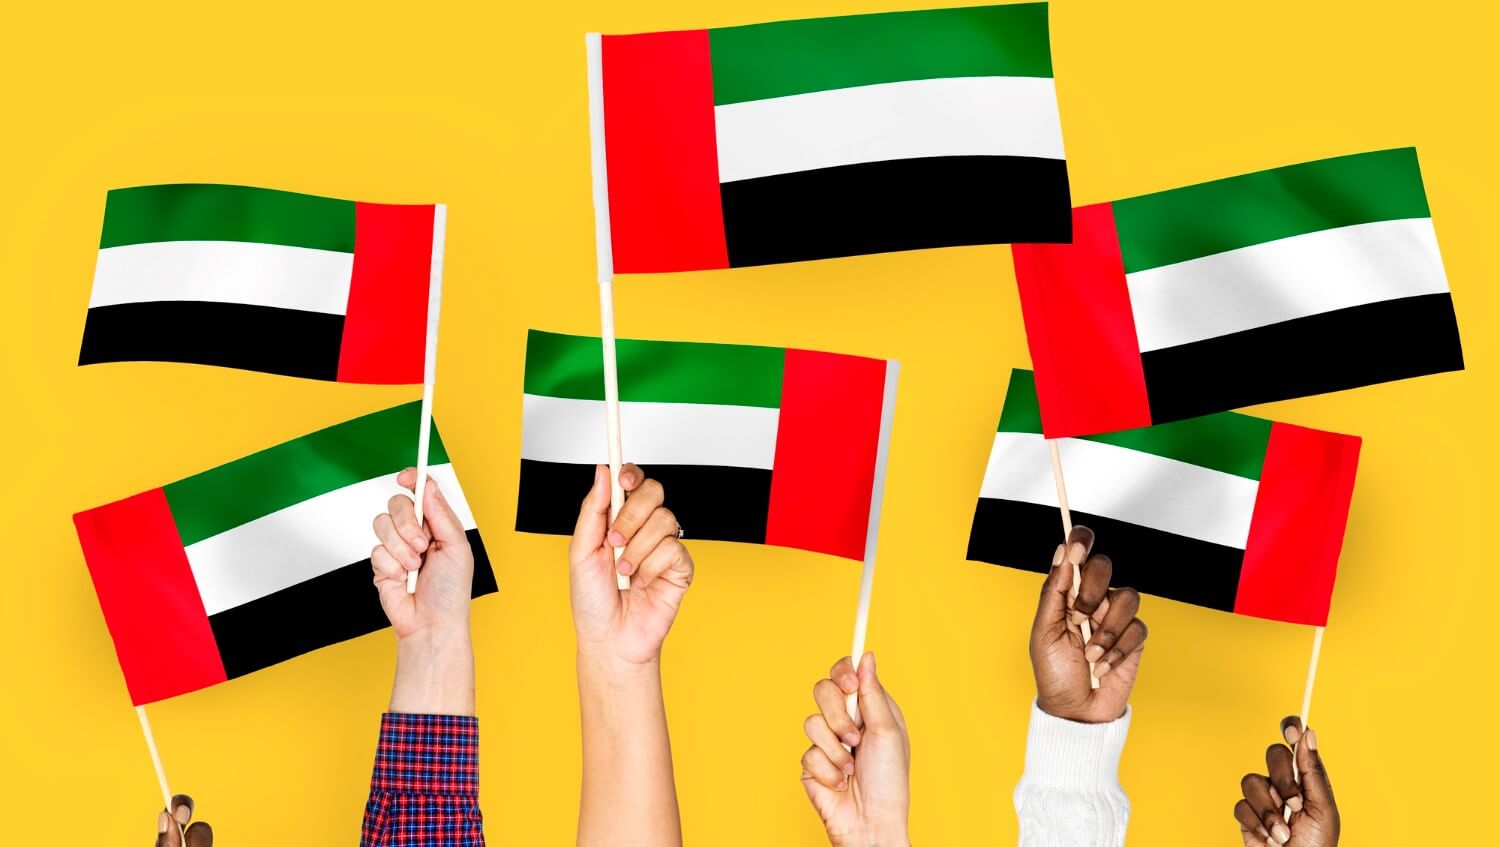 UAE National Day 2021: Top 10 things to do on the nation’s Golden Jubilee